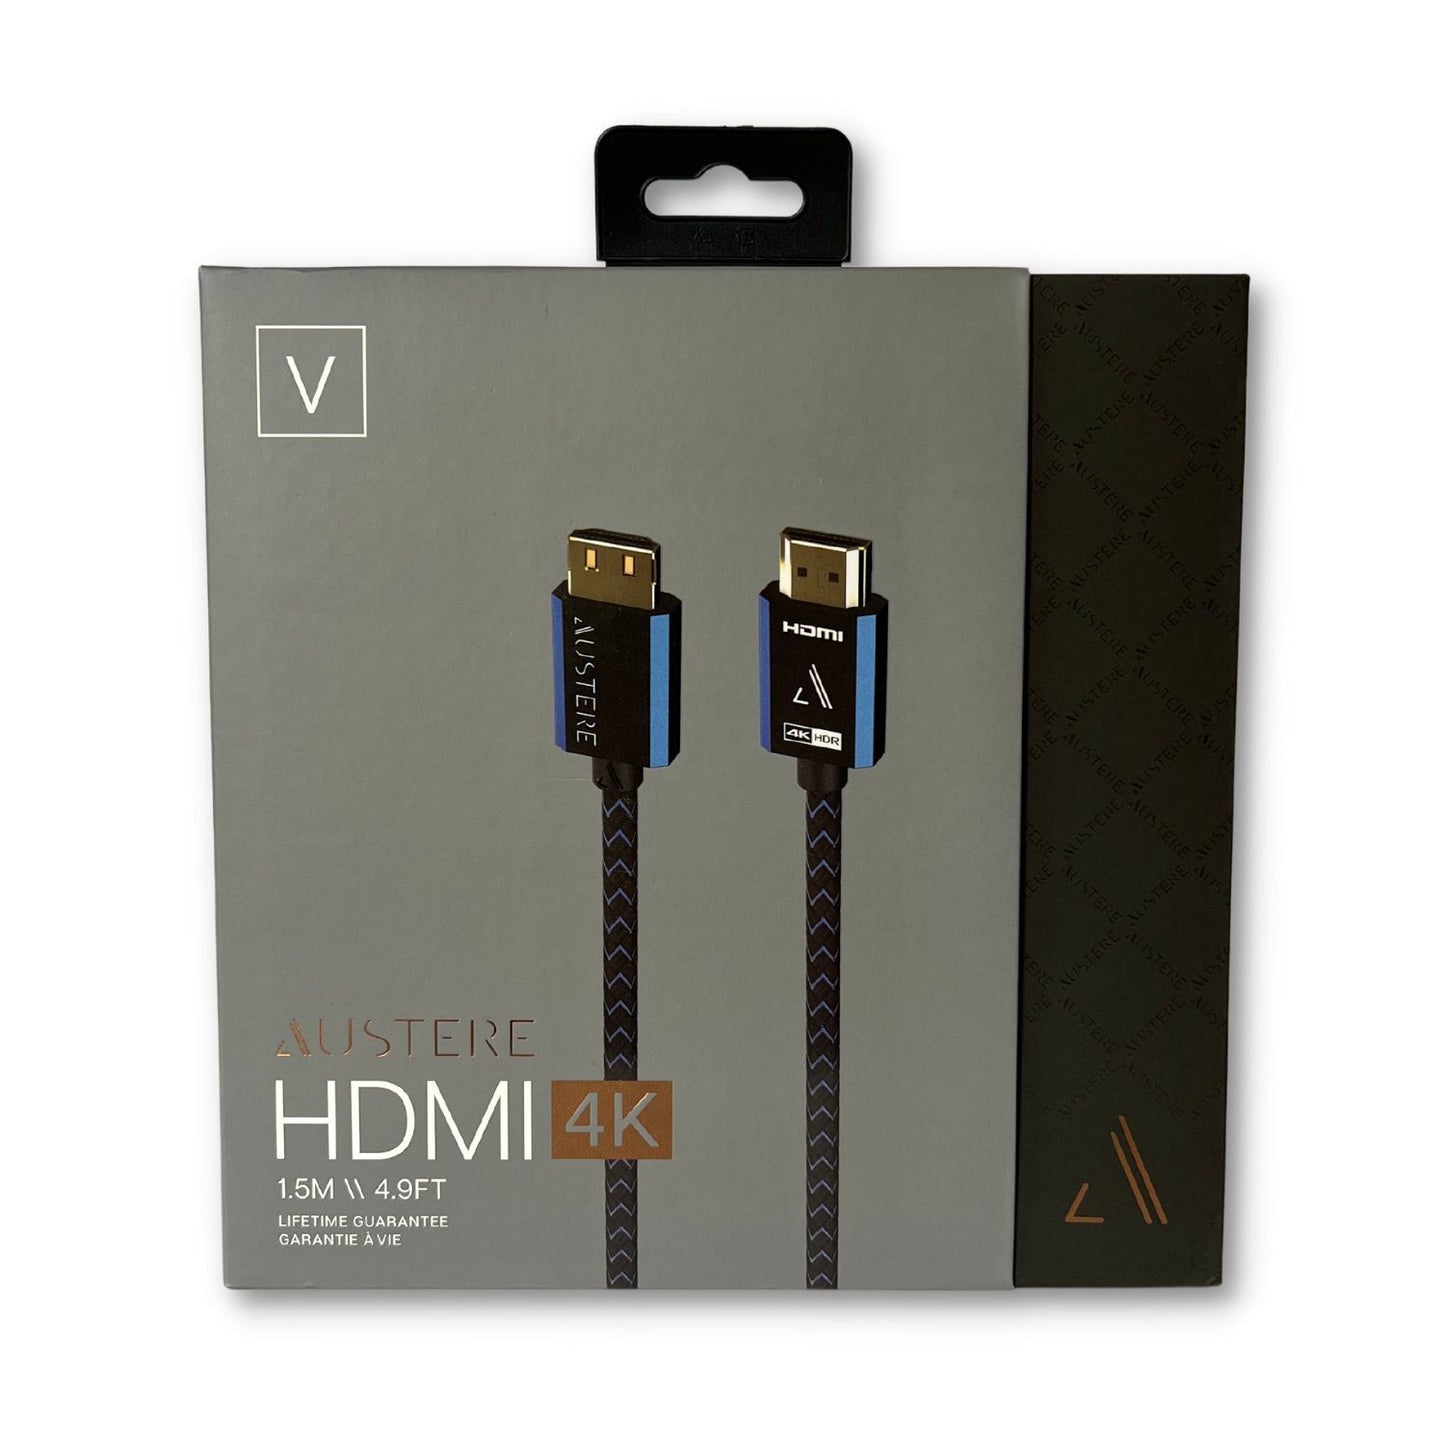 Austere V Series 4K HDMI Cable 1.5m Premium Certified HDMI, 4K HDR, 18Gbps-4K60